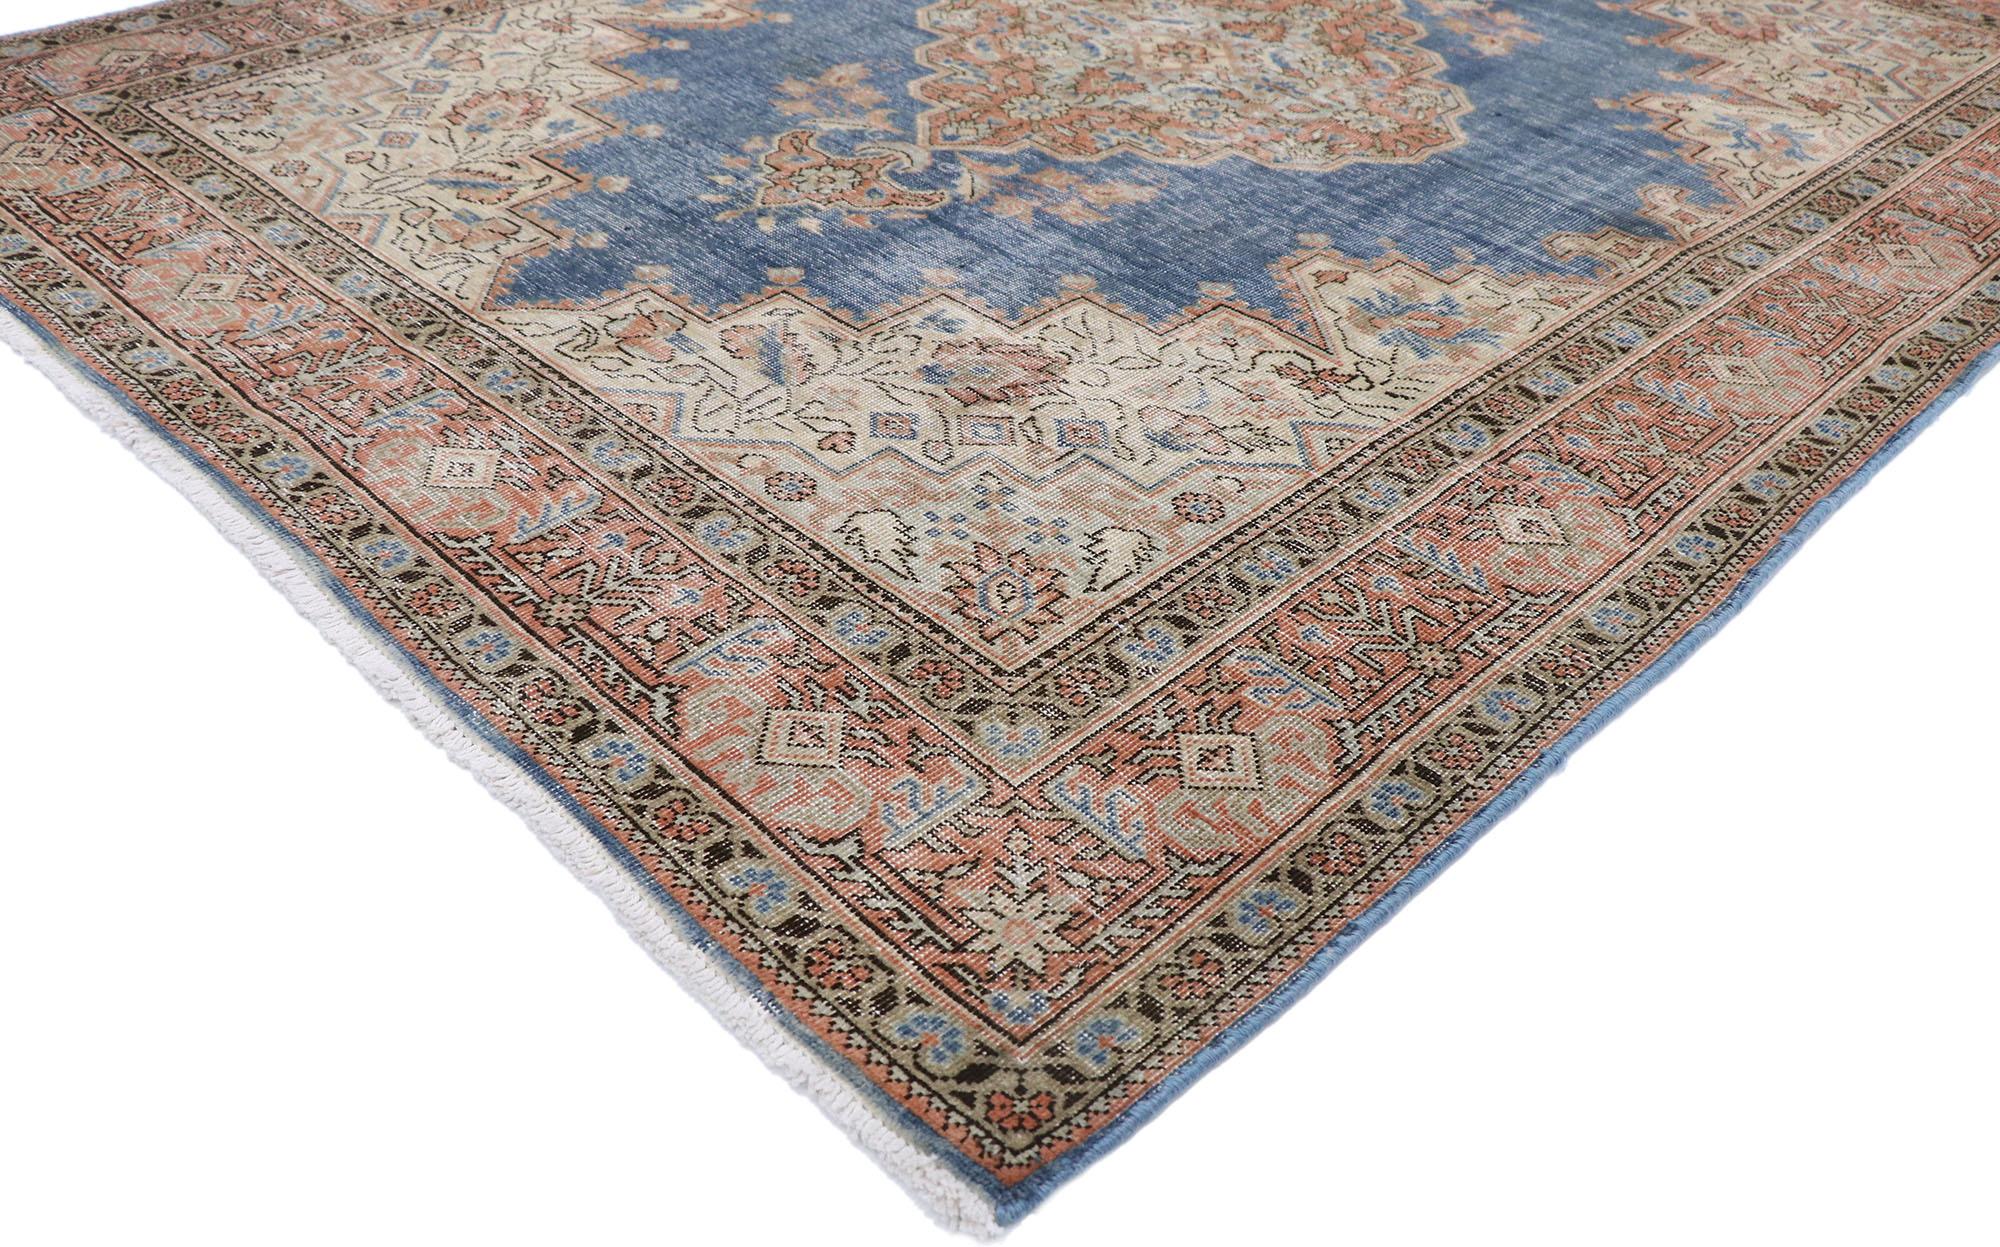 60876 Distressed Antique Persian Tabriz rug, 05'05 x 07'00.
with its timeless design and lovingly time-worn composition, this hand knotted wool antique Persian Tabriz rug is a captivating vision of woven beauty. The eye-catching botanical pattern